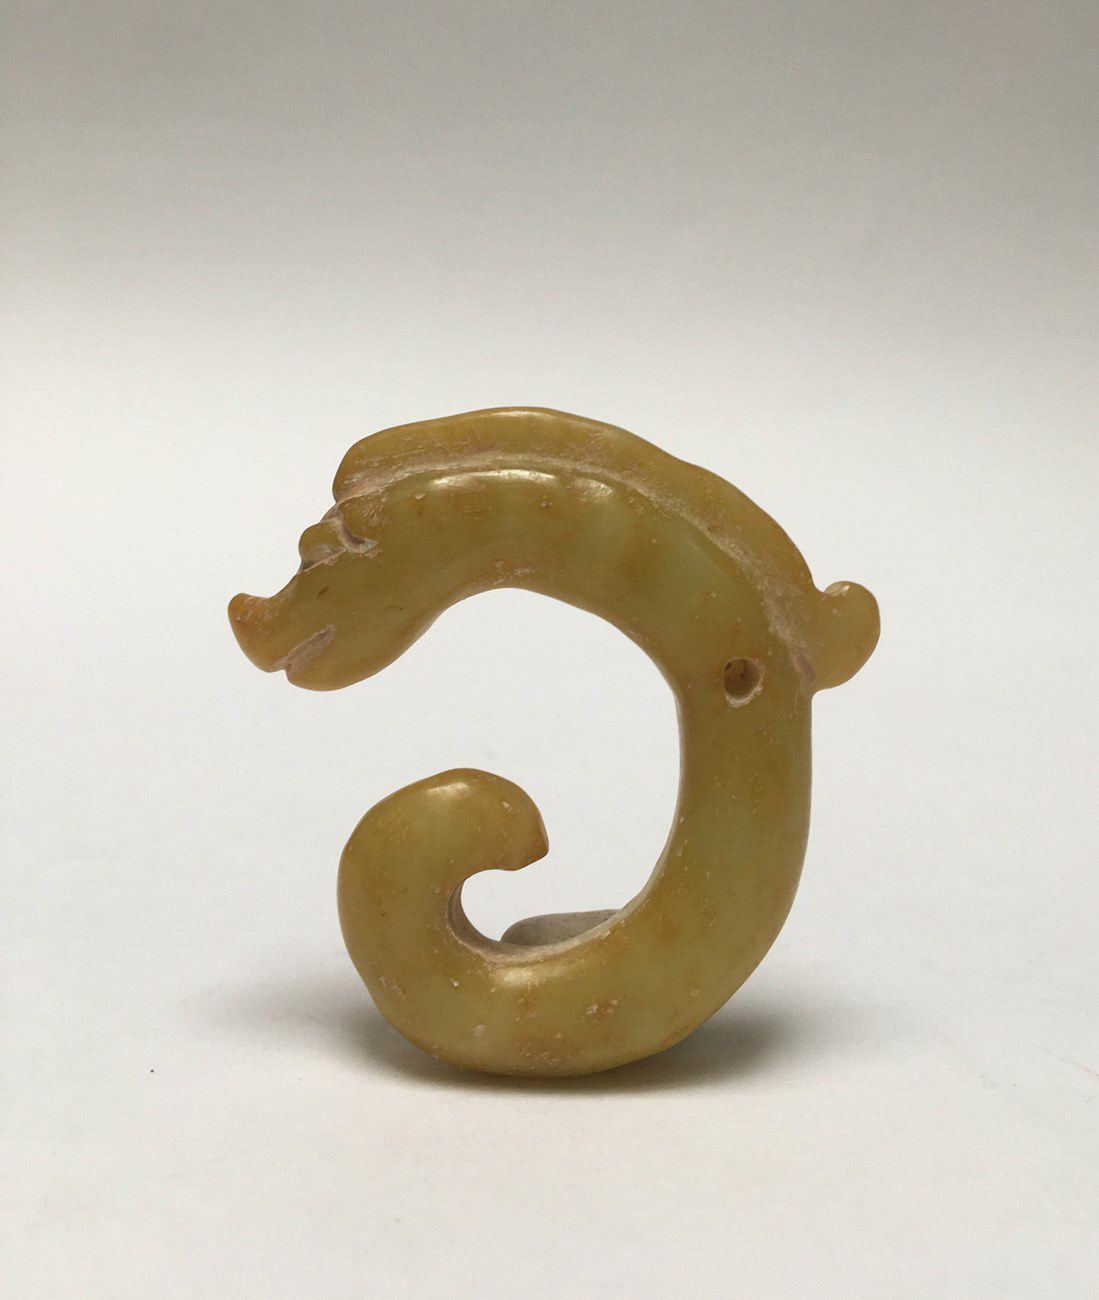 Null Dragon rolled up in jade "amber". A hole pierces the piece in the middle.

&hellip;